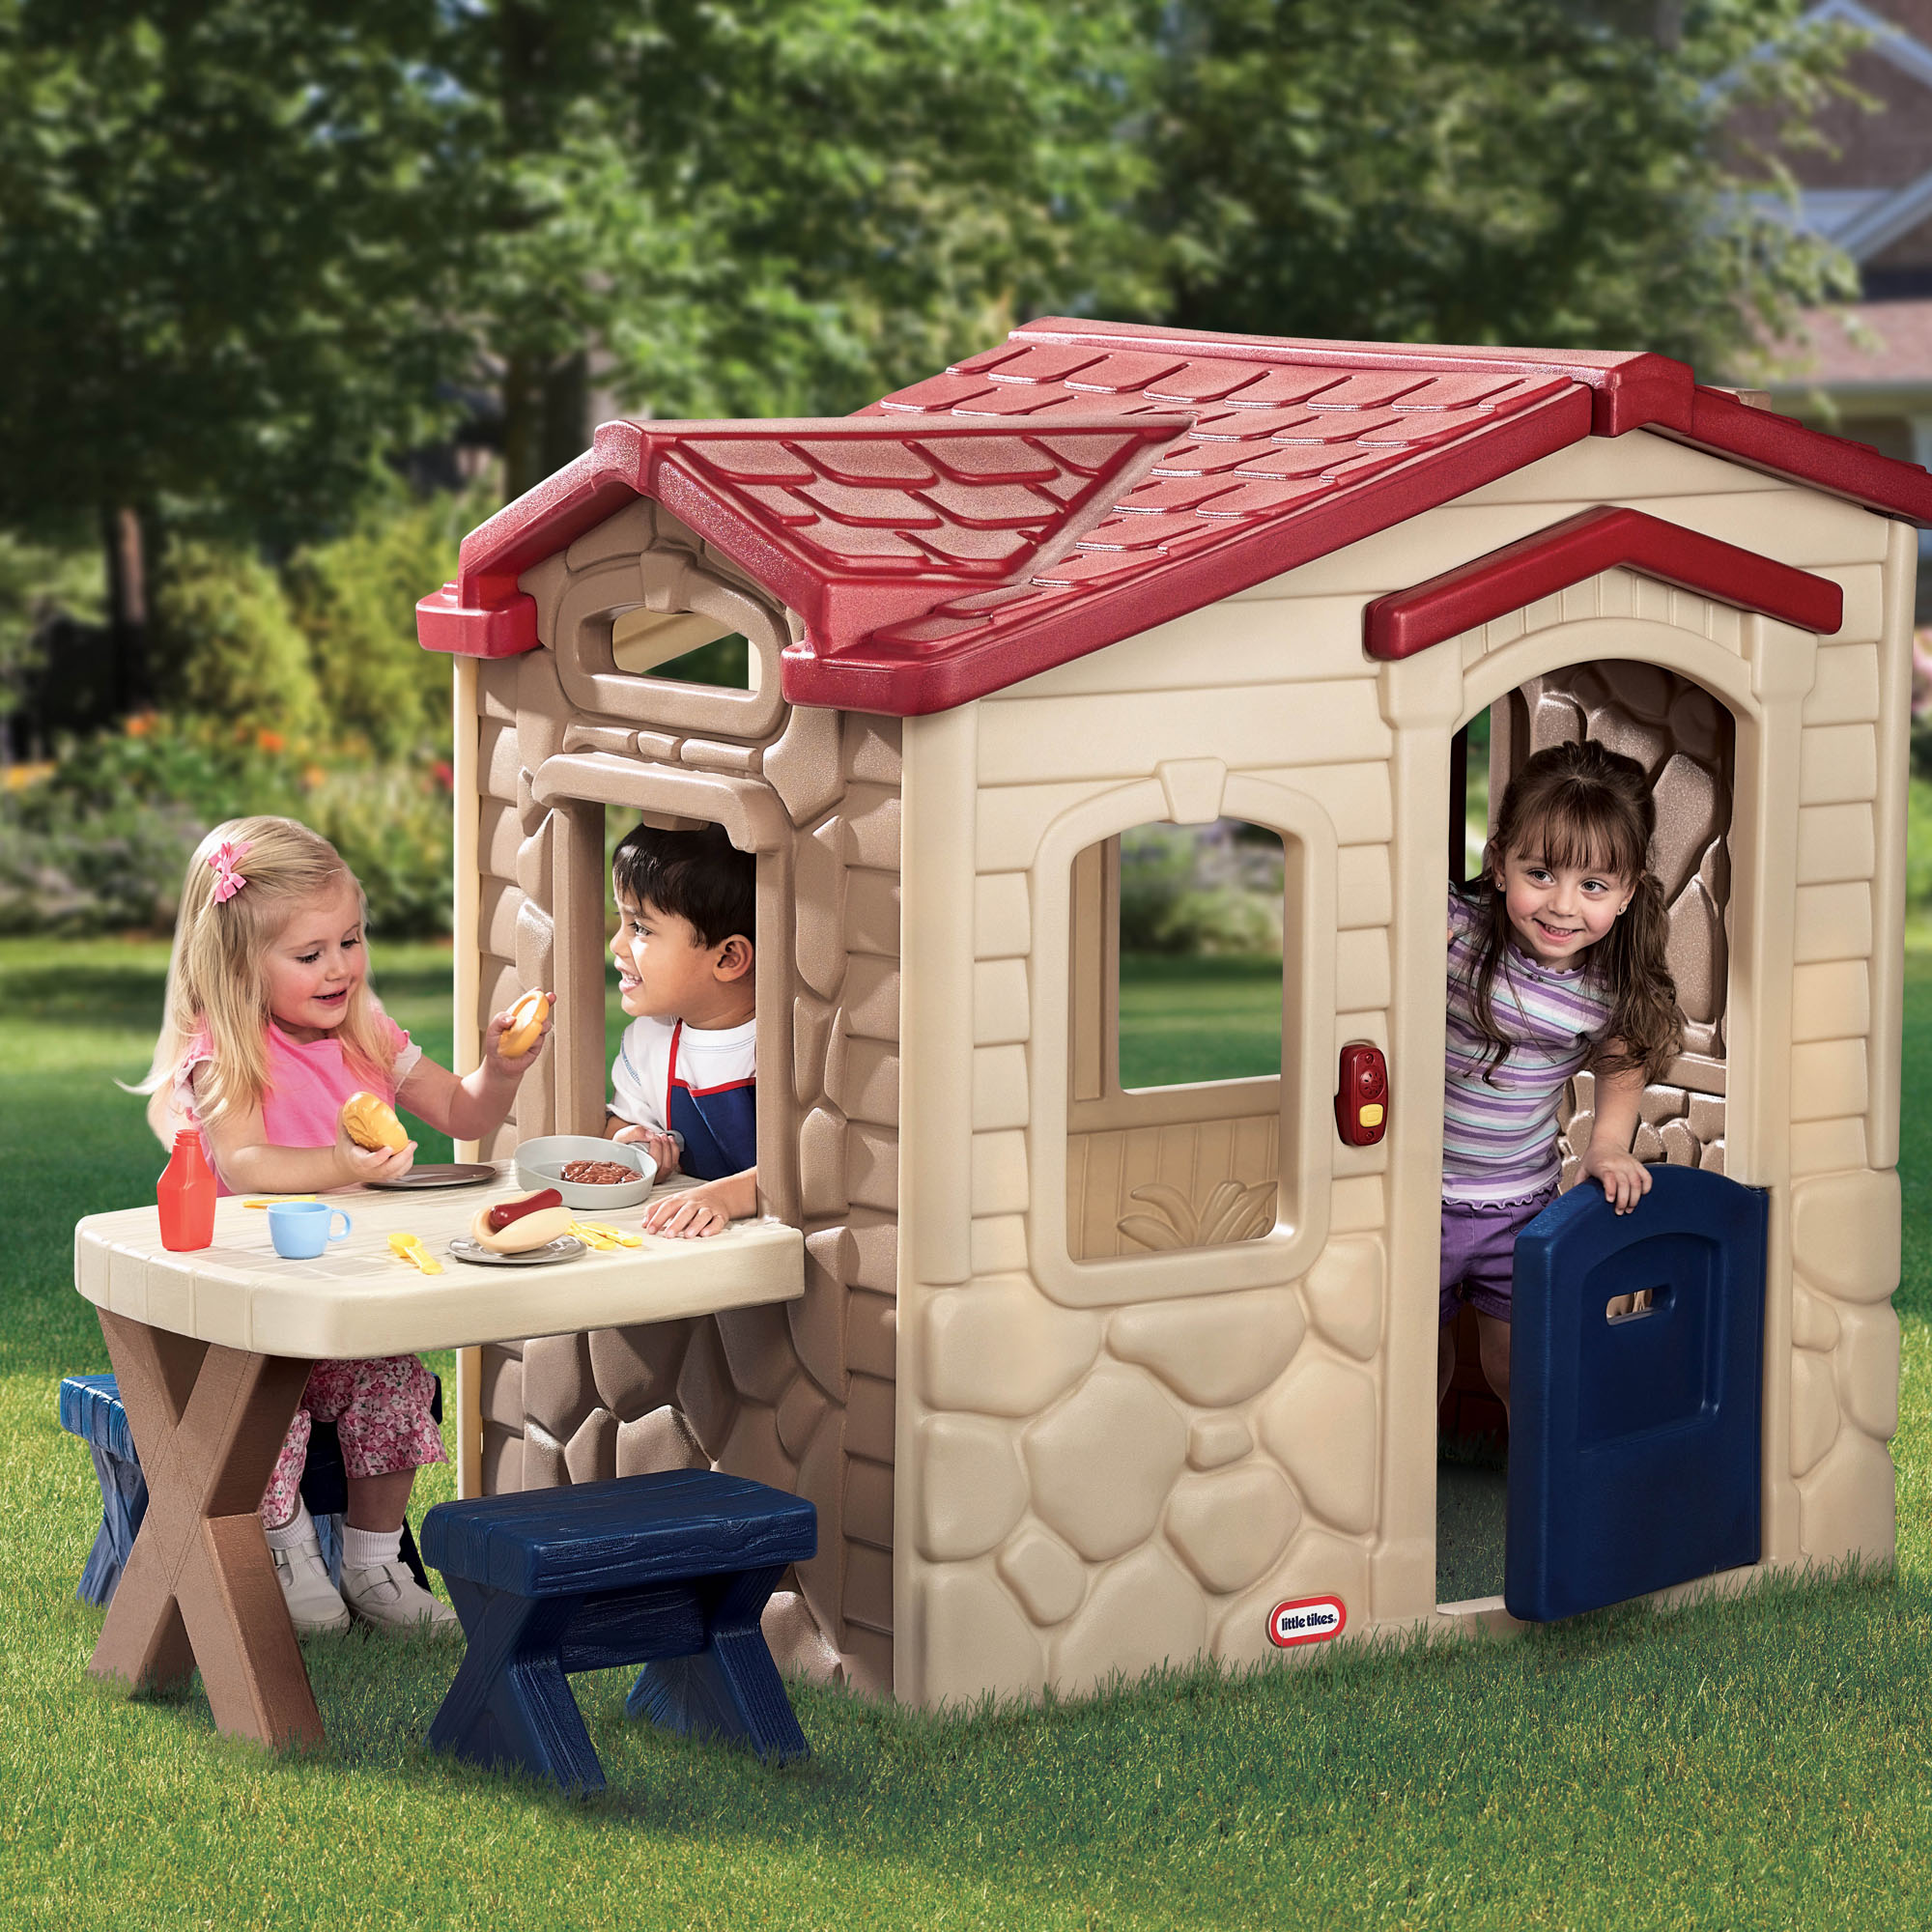 Little Tikes Picnic on the Patio Playhouse with 20 Play Accessories, Working Doorbell, Indoor and Outdoor Backyard Toy, Tan- For Kids Toddlers Boys Girls Ages 2 3 4+ Year Old - image 4 of 5